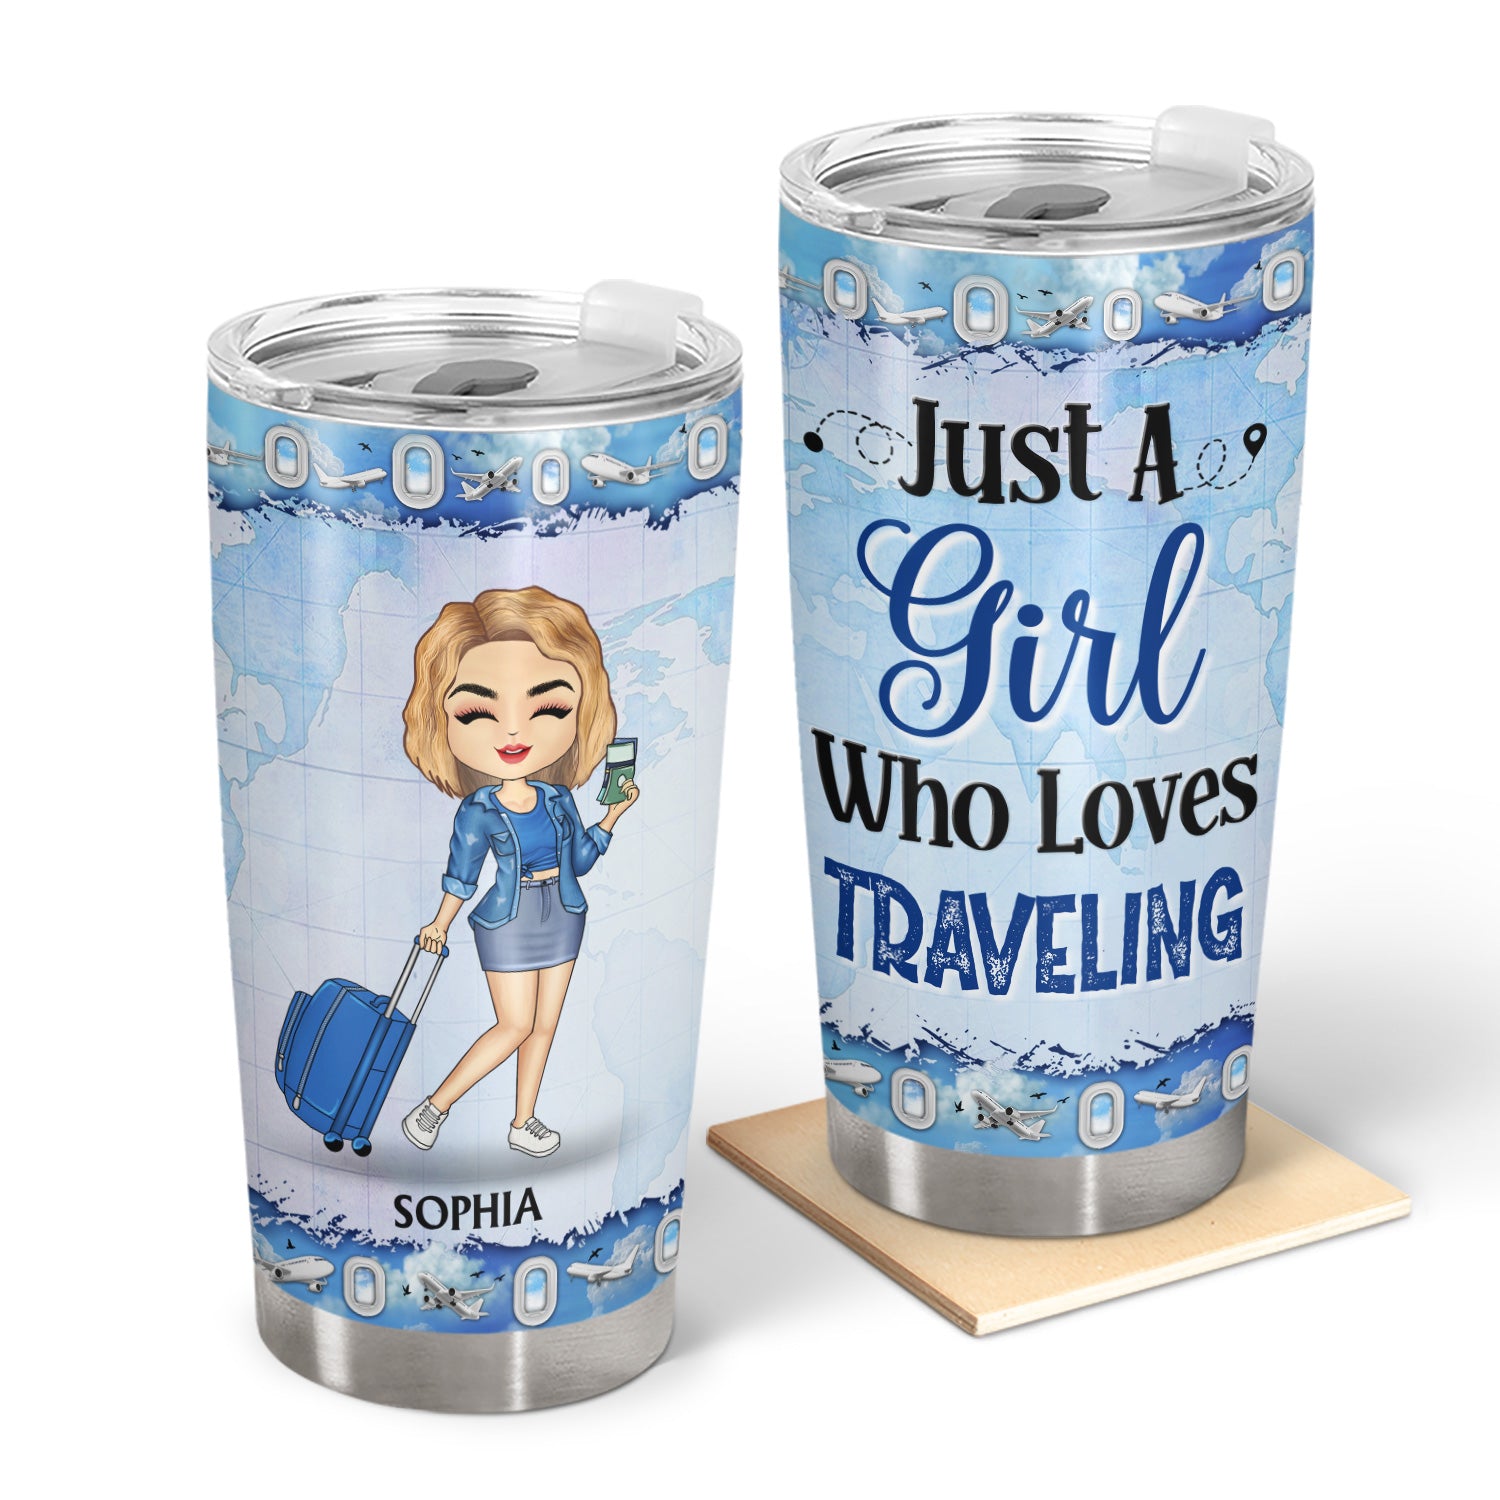 Just A Girl Boy Who Loves Traveling Cruising - Birthday Gift For Him, Her, Trippin', Vacation Lovers - Personalized Custom Tumbler